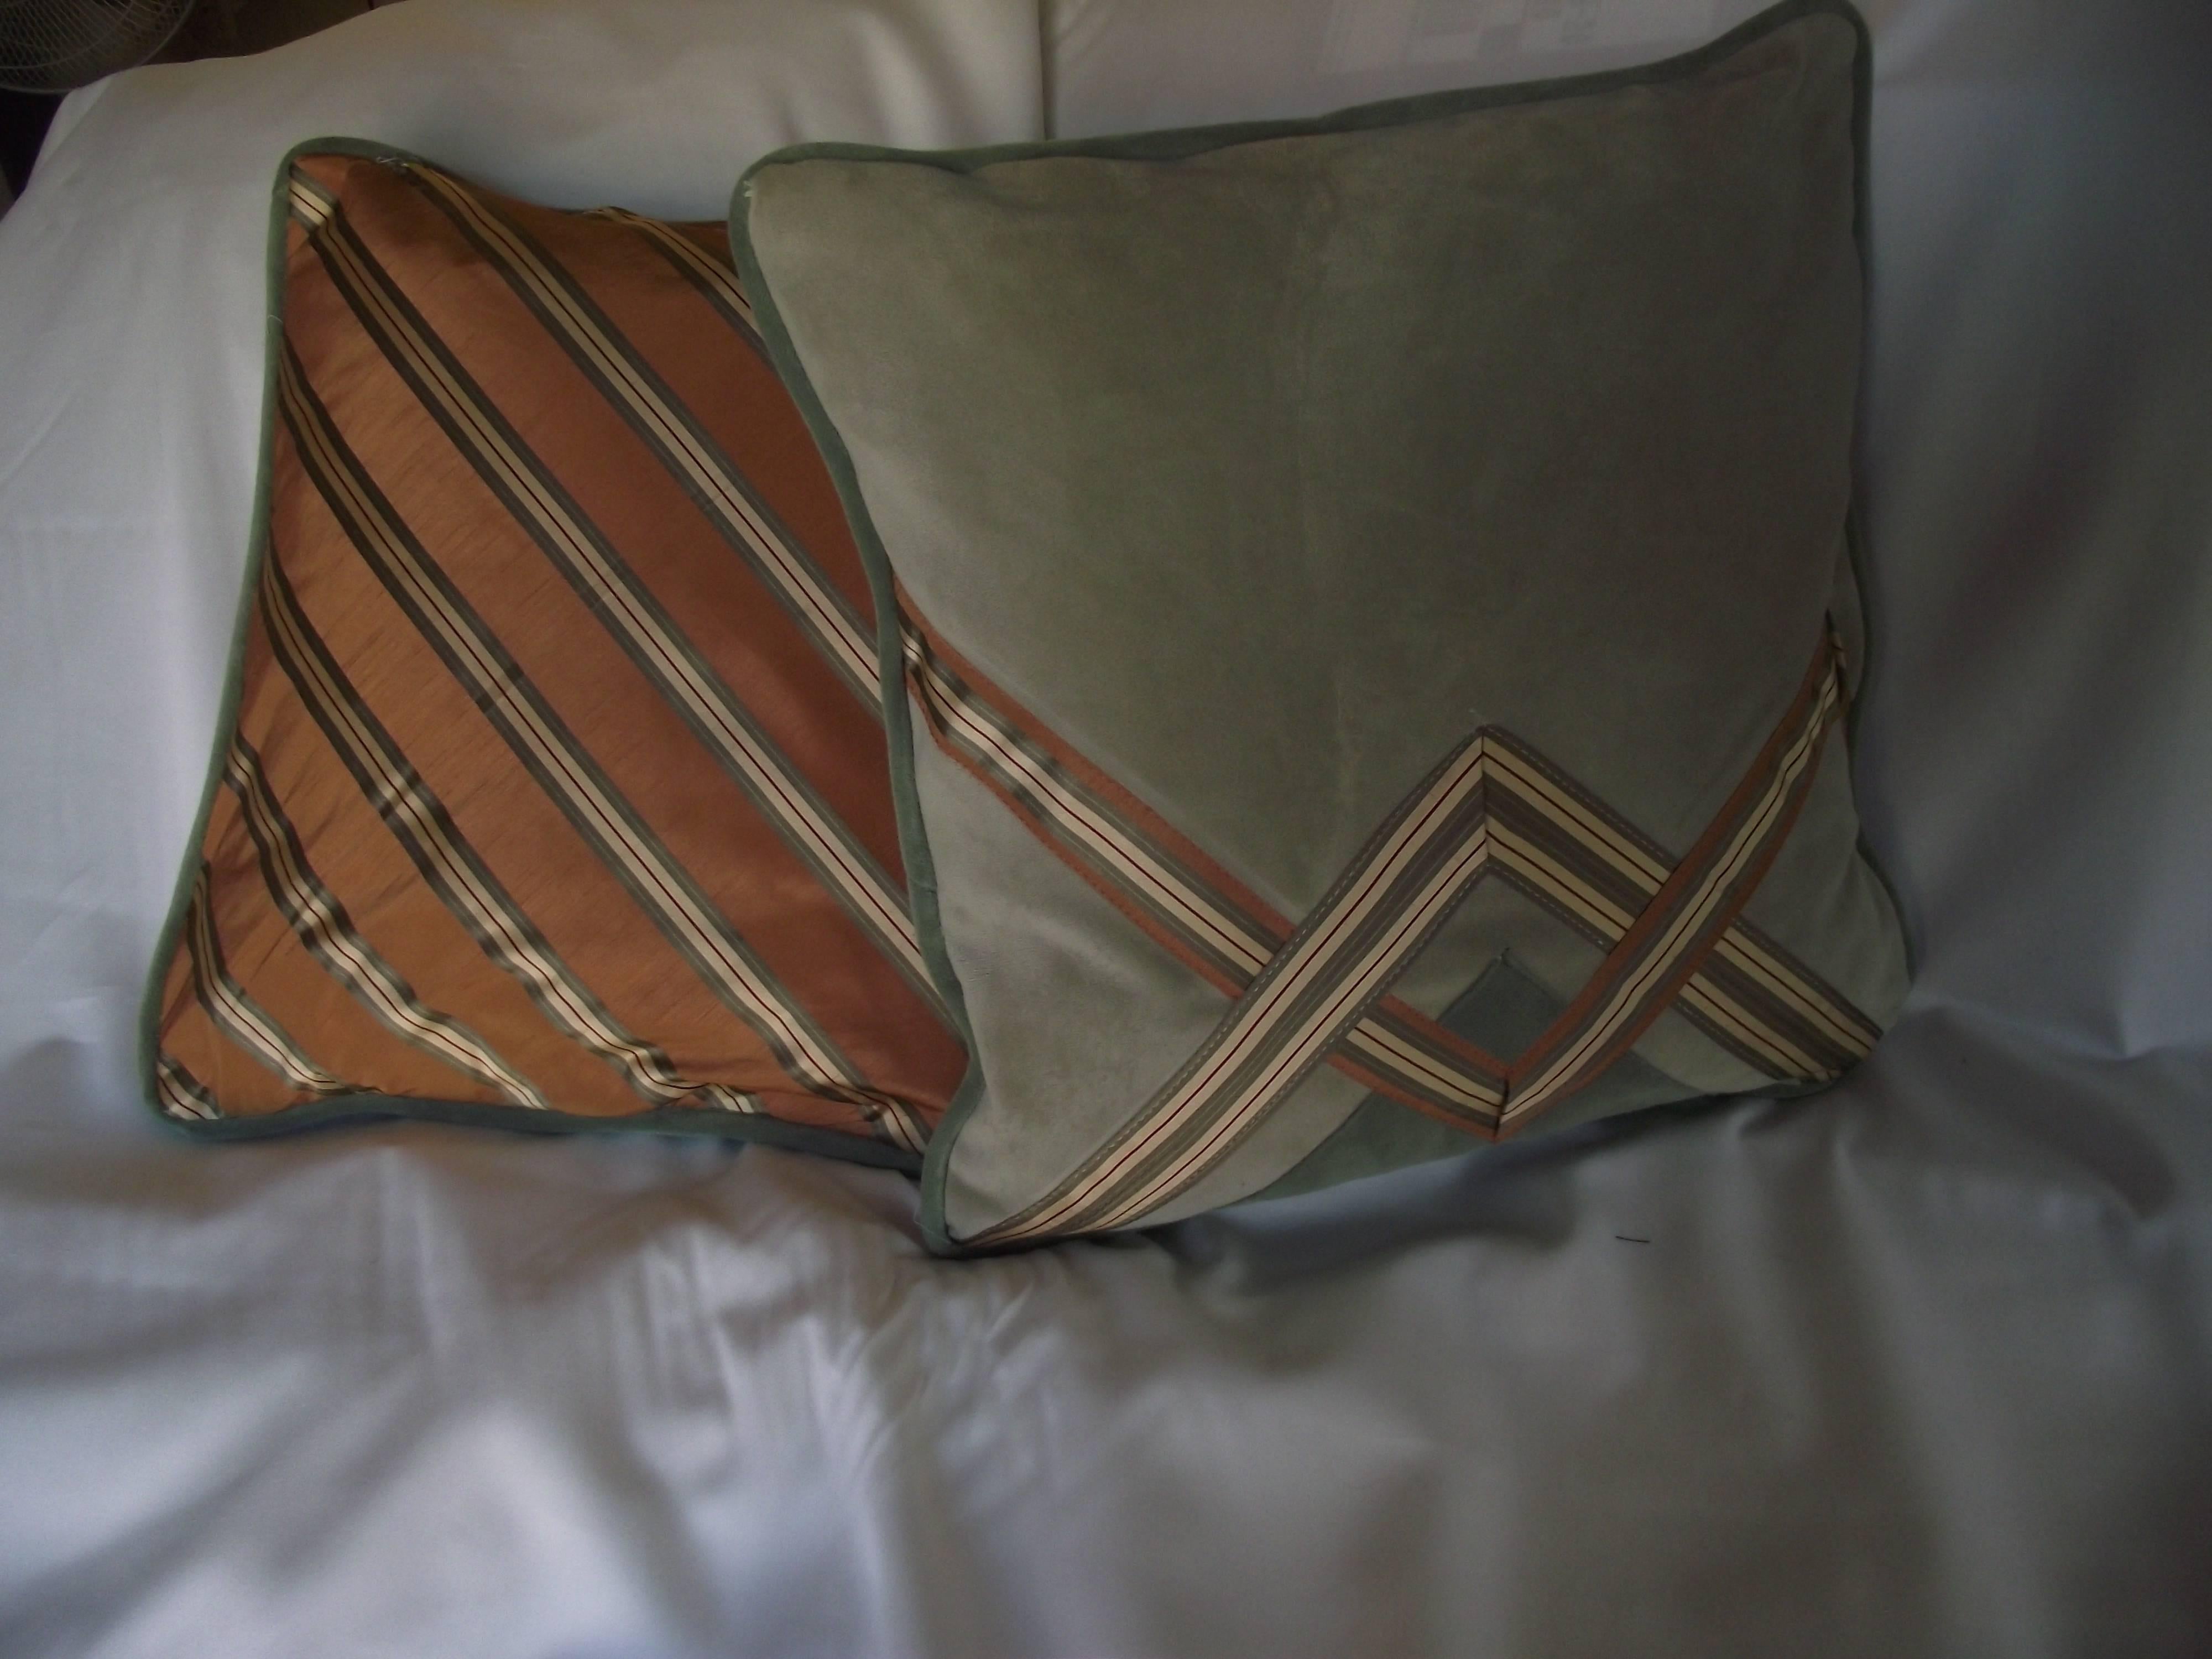 American Art Deco Style Pillows, Pale Green, Siena and Gold Original Deco Designed Pillow For Sale